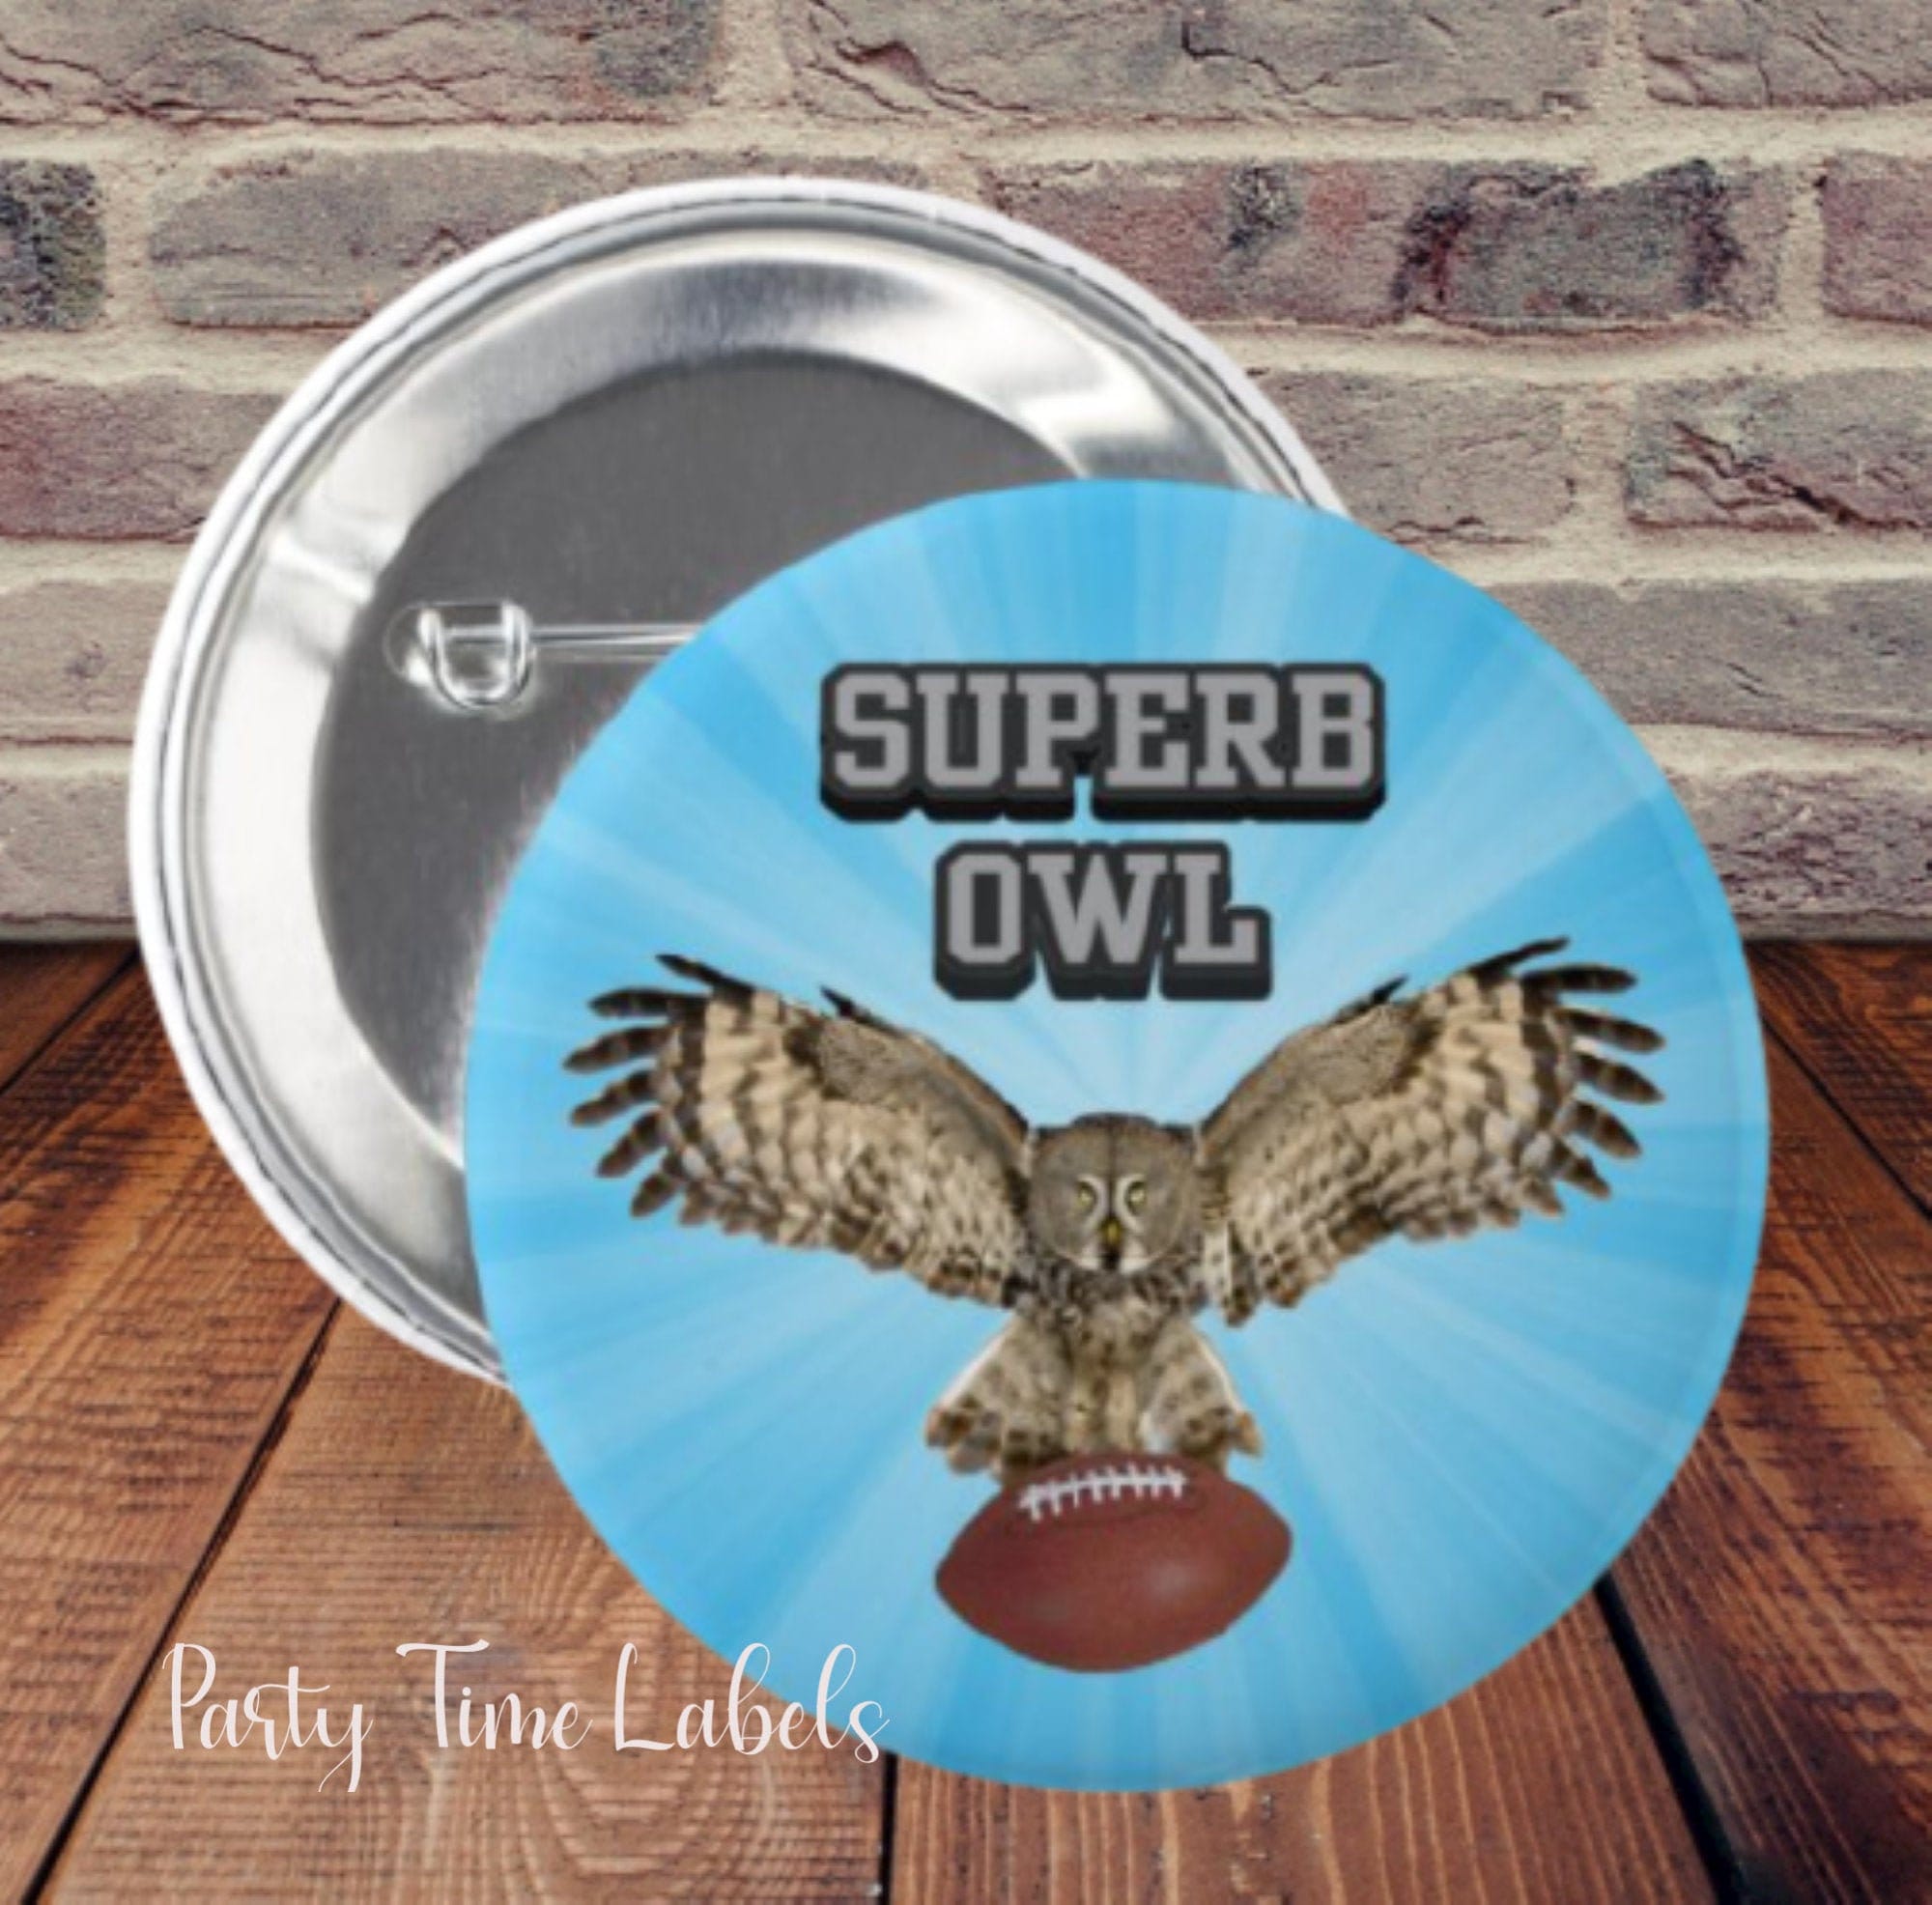 Superb Owl Pin Back Button - What We Do in the Shadows - Super Bowl Party Favors - 2.25 Inch Pinback